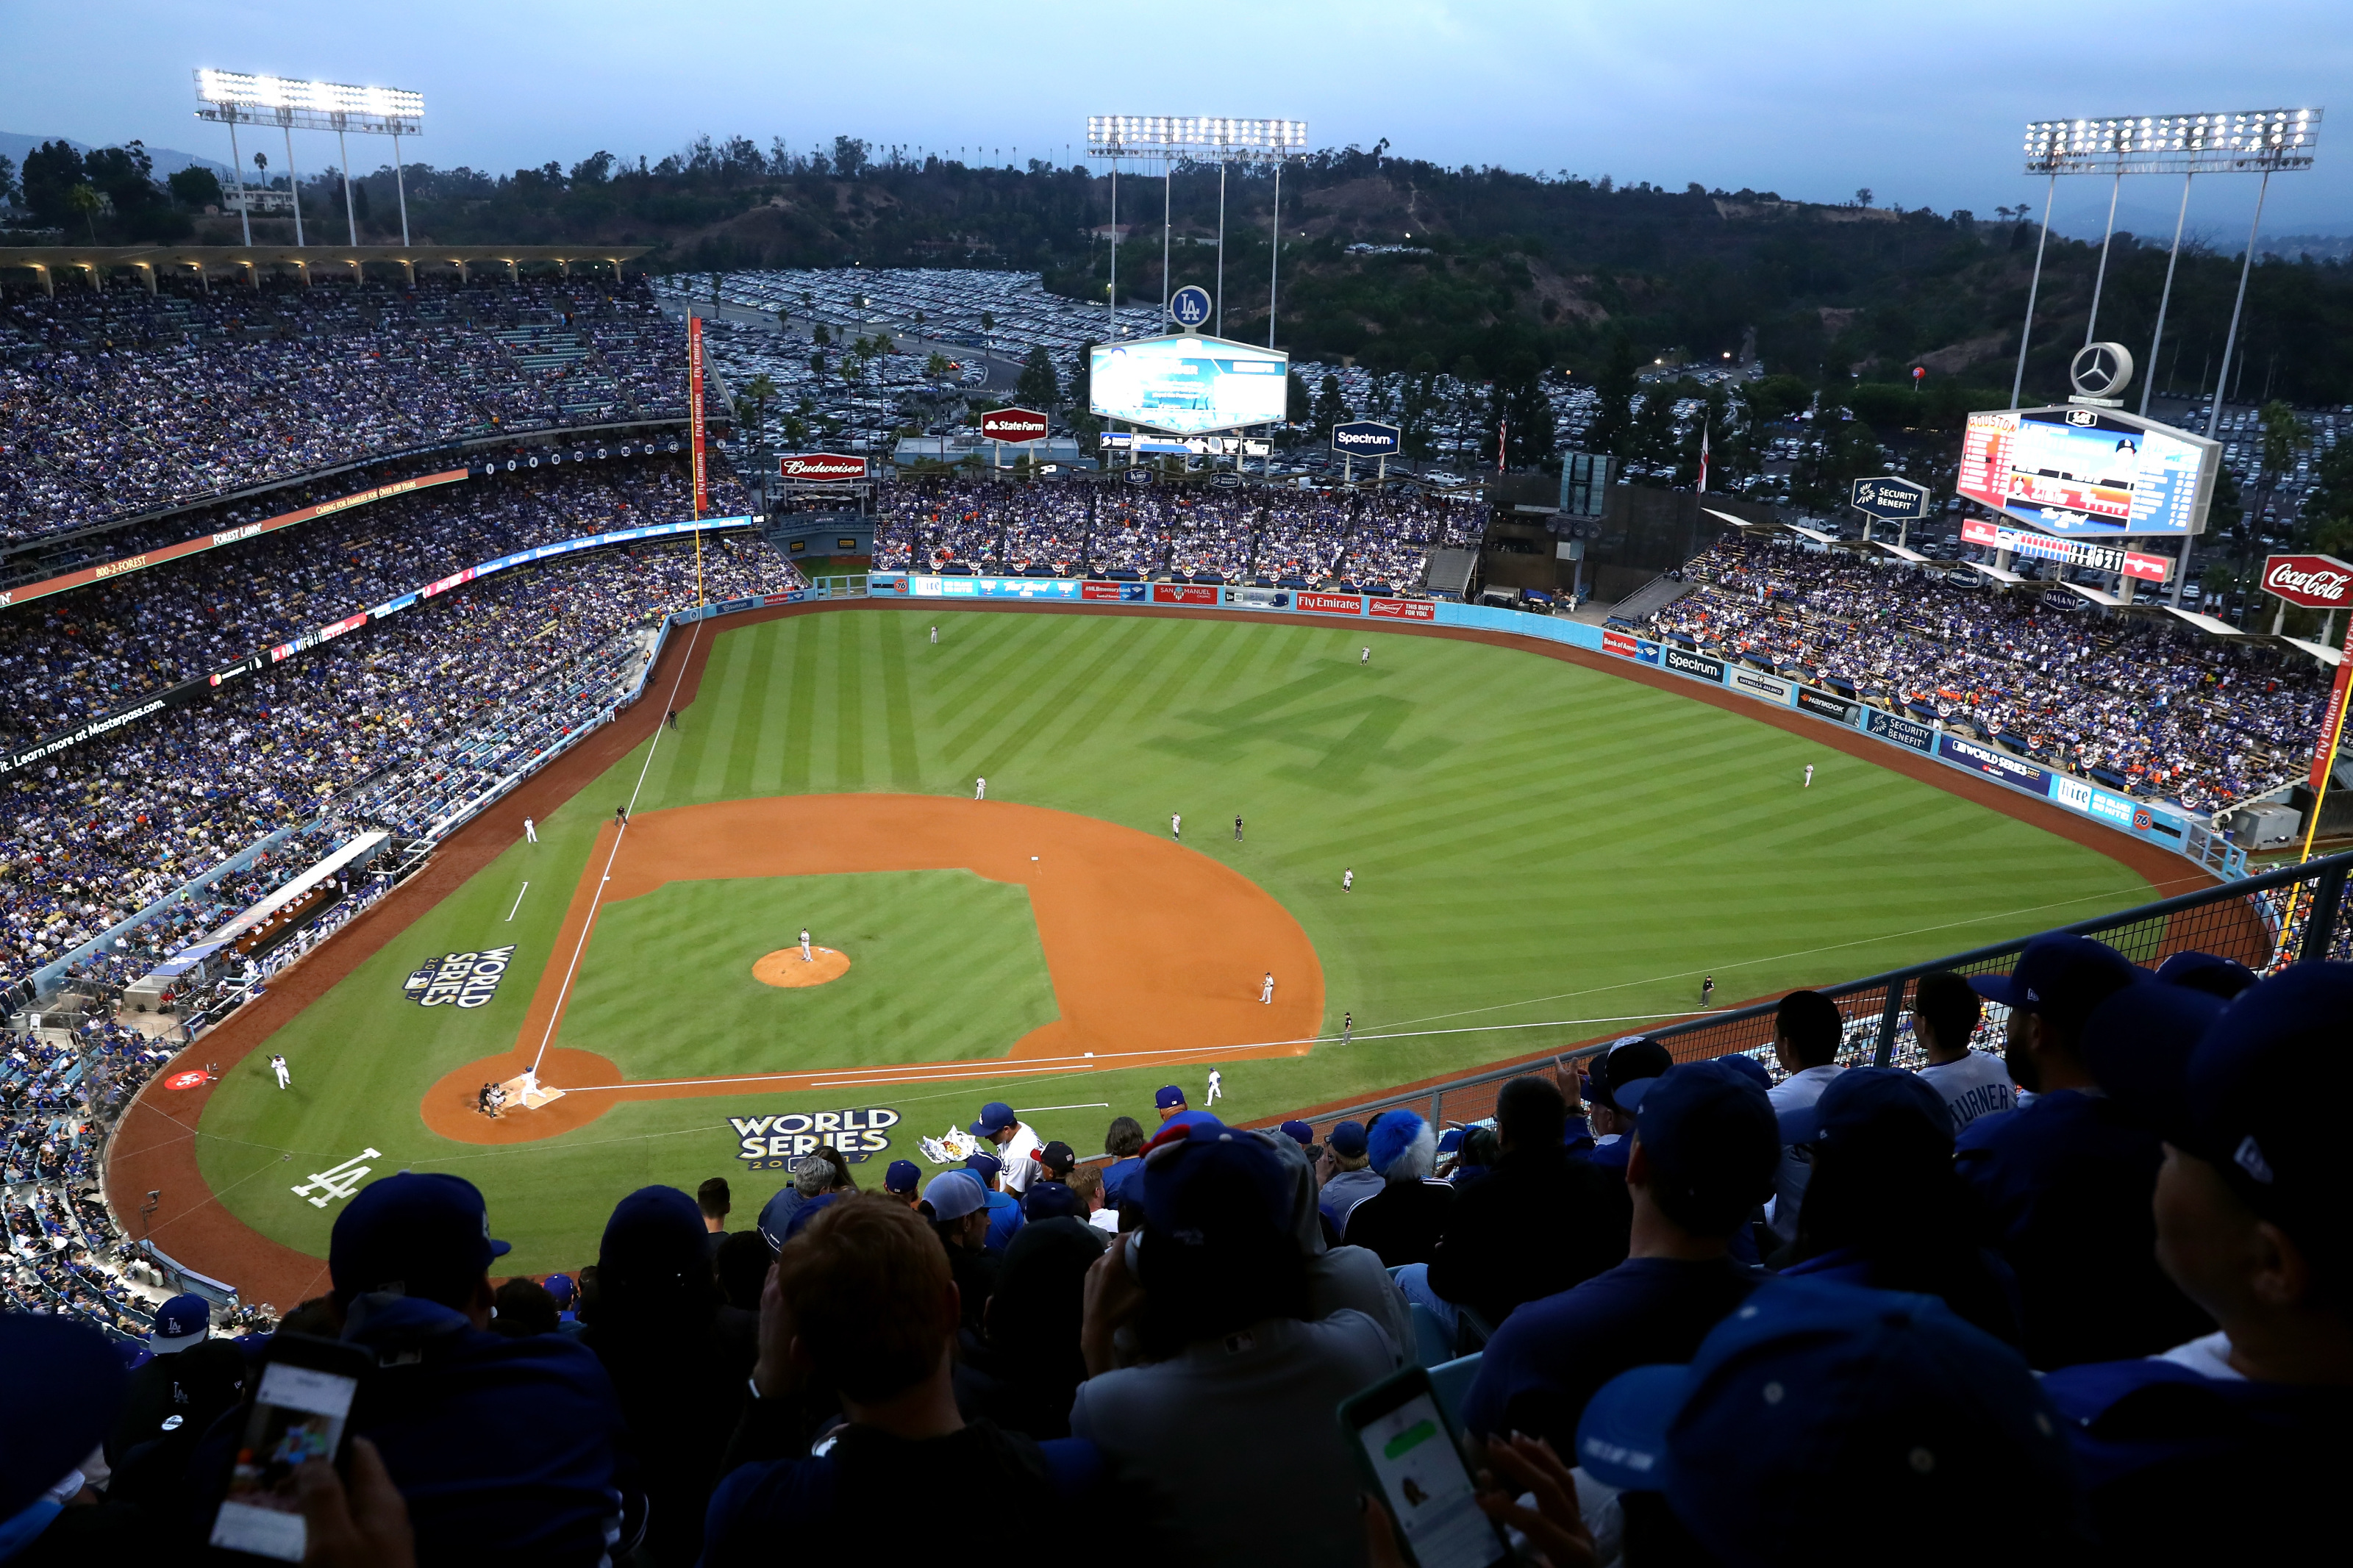 Los Angeles Dodgers: New photos show plans for center field renovations